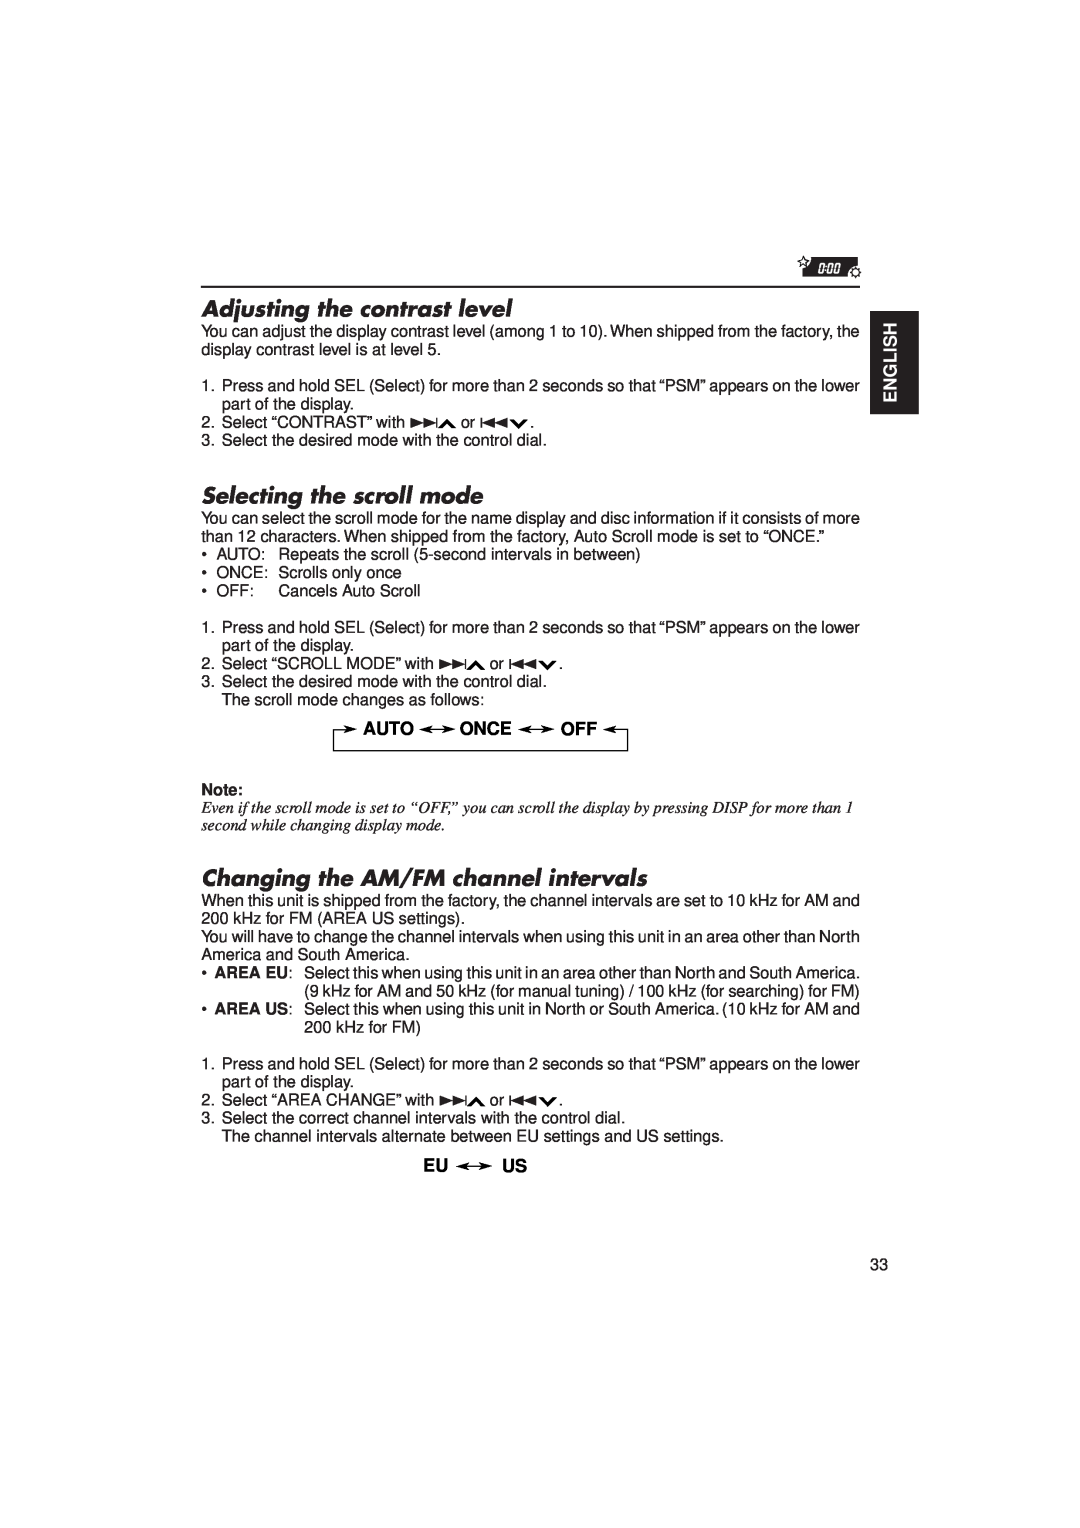 JVC KD-SX1000RJ manual Adjusting the contrast level, Selecting the scroll mode, Changing the AM/FM channel intervals, Eu Us 